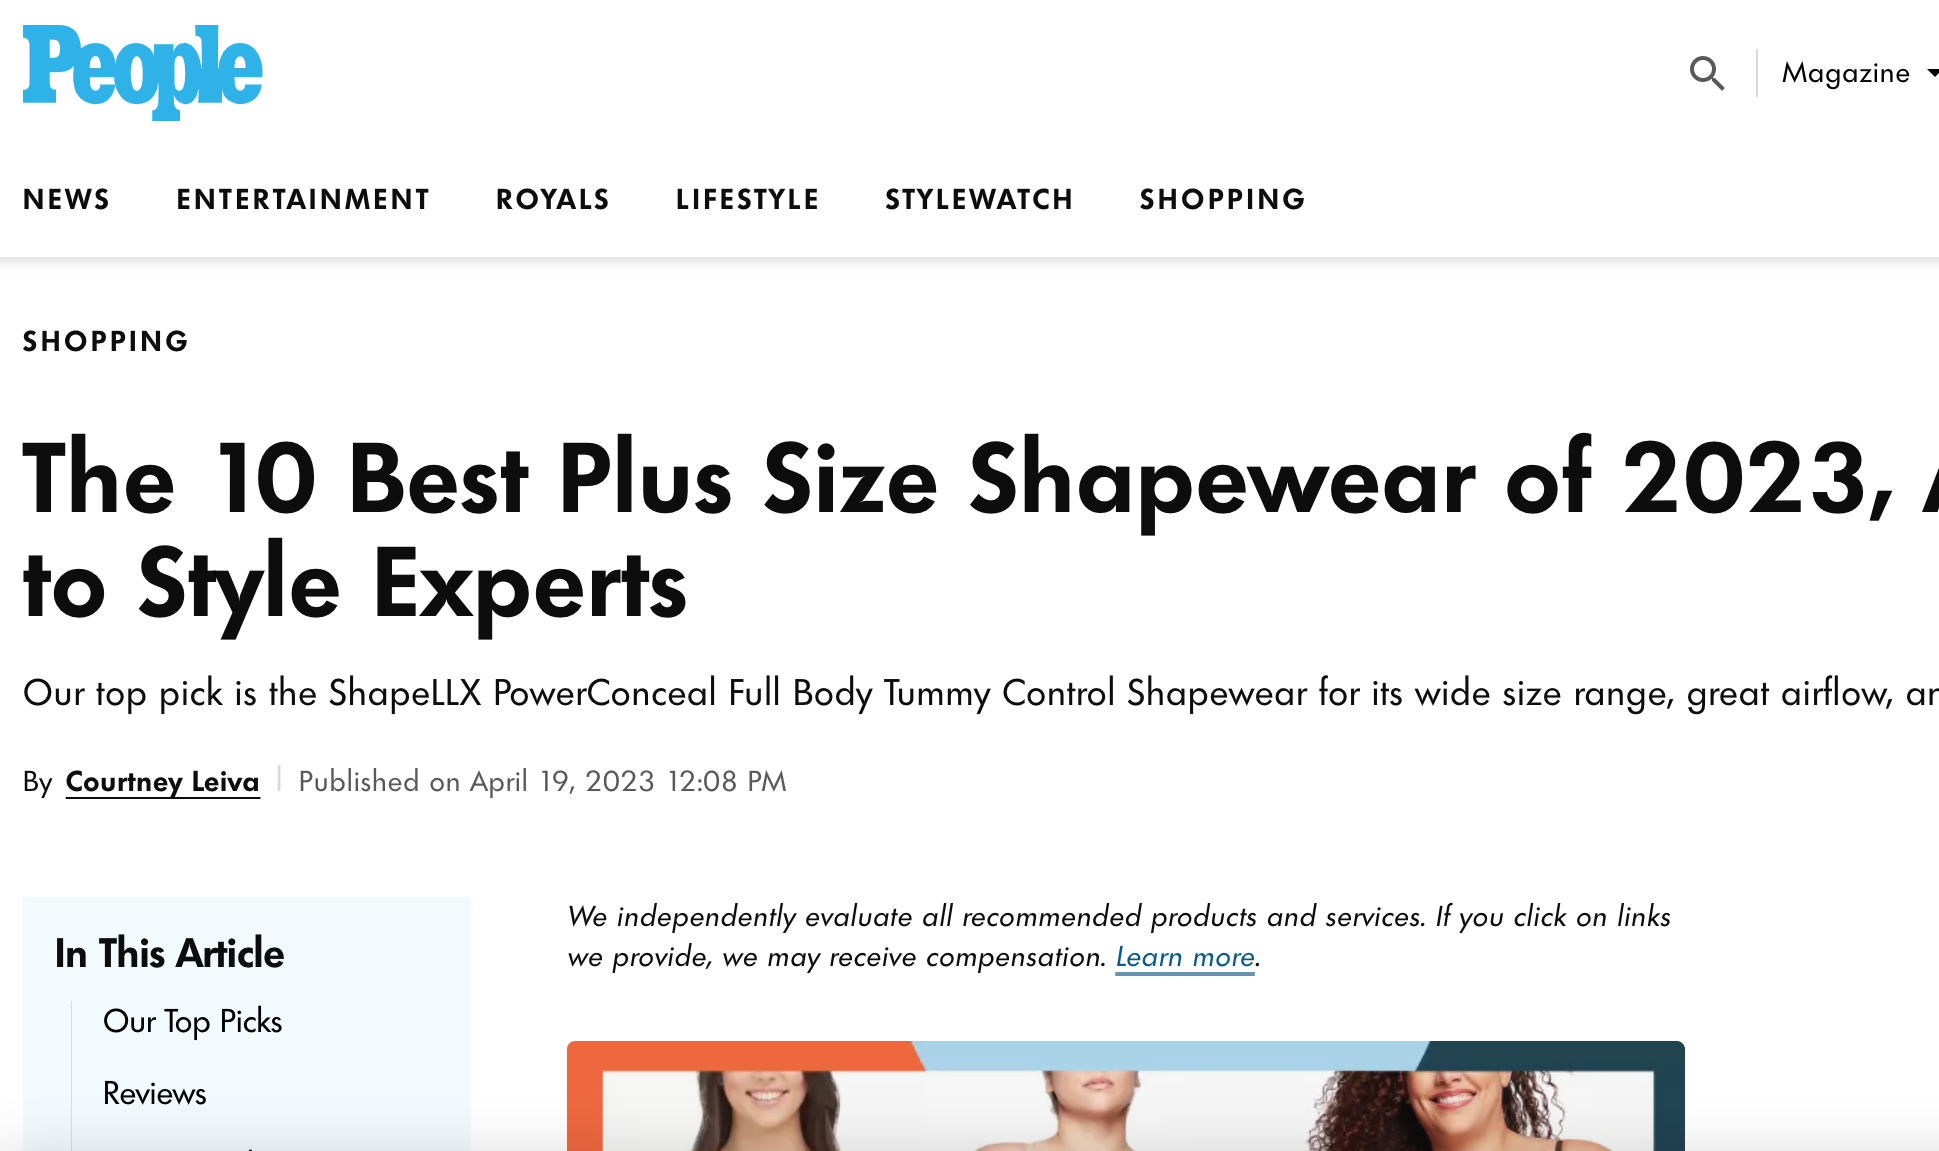 PEOPLE: The 10 Best Plus Size Shapewear of 2023, According to Style Experts